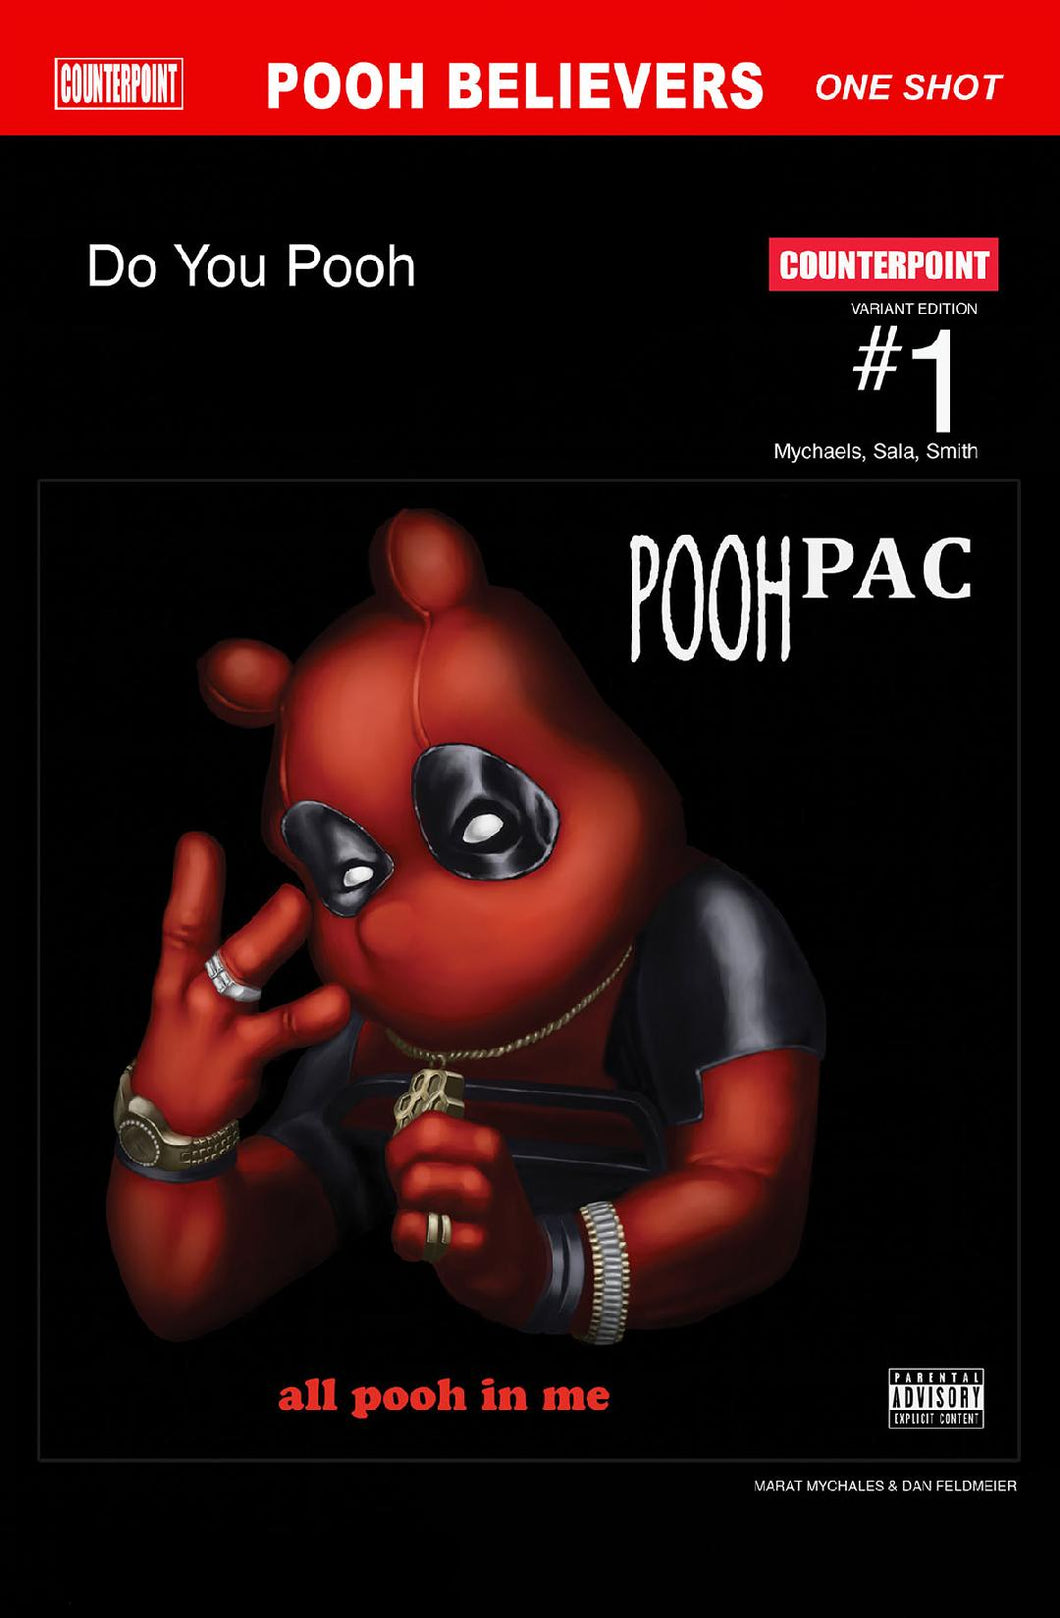 Do You Pooh Pooh Believers 2Pac Tupac Album Cover Homage Variant Cover by Marat Mychaels